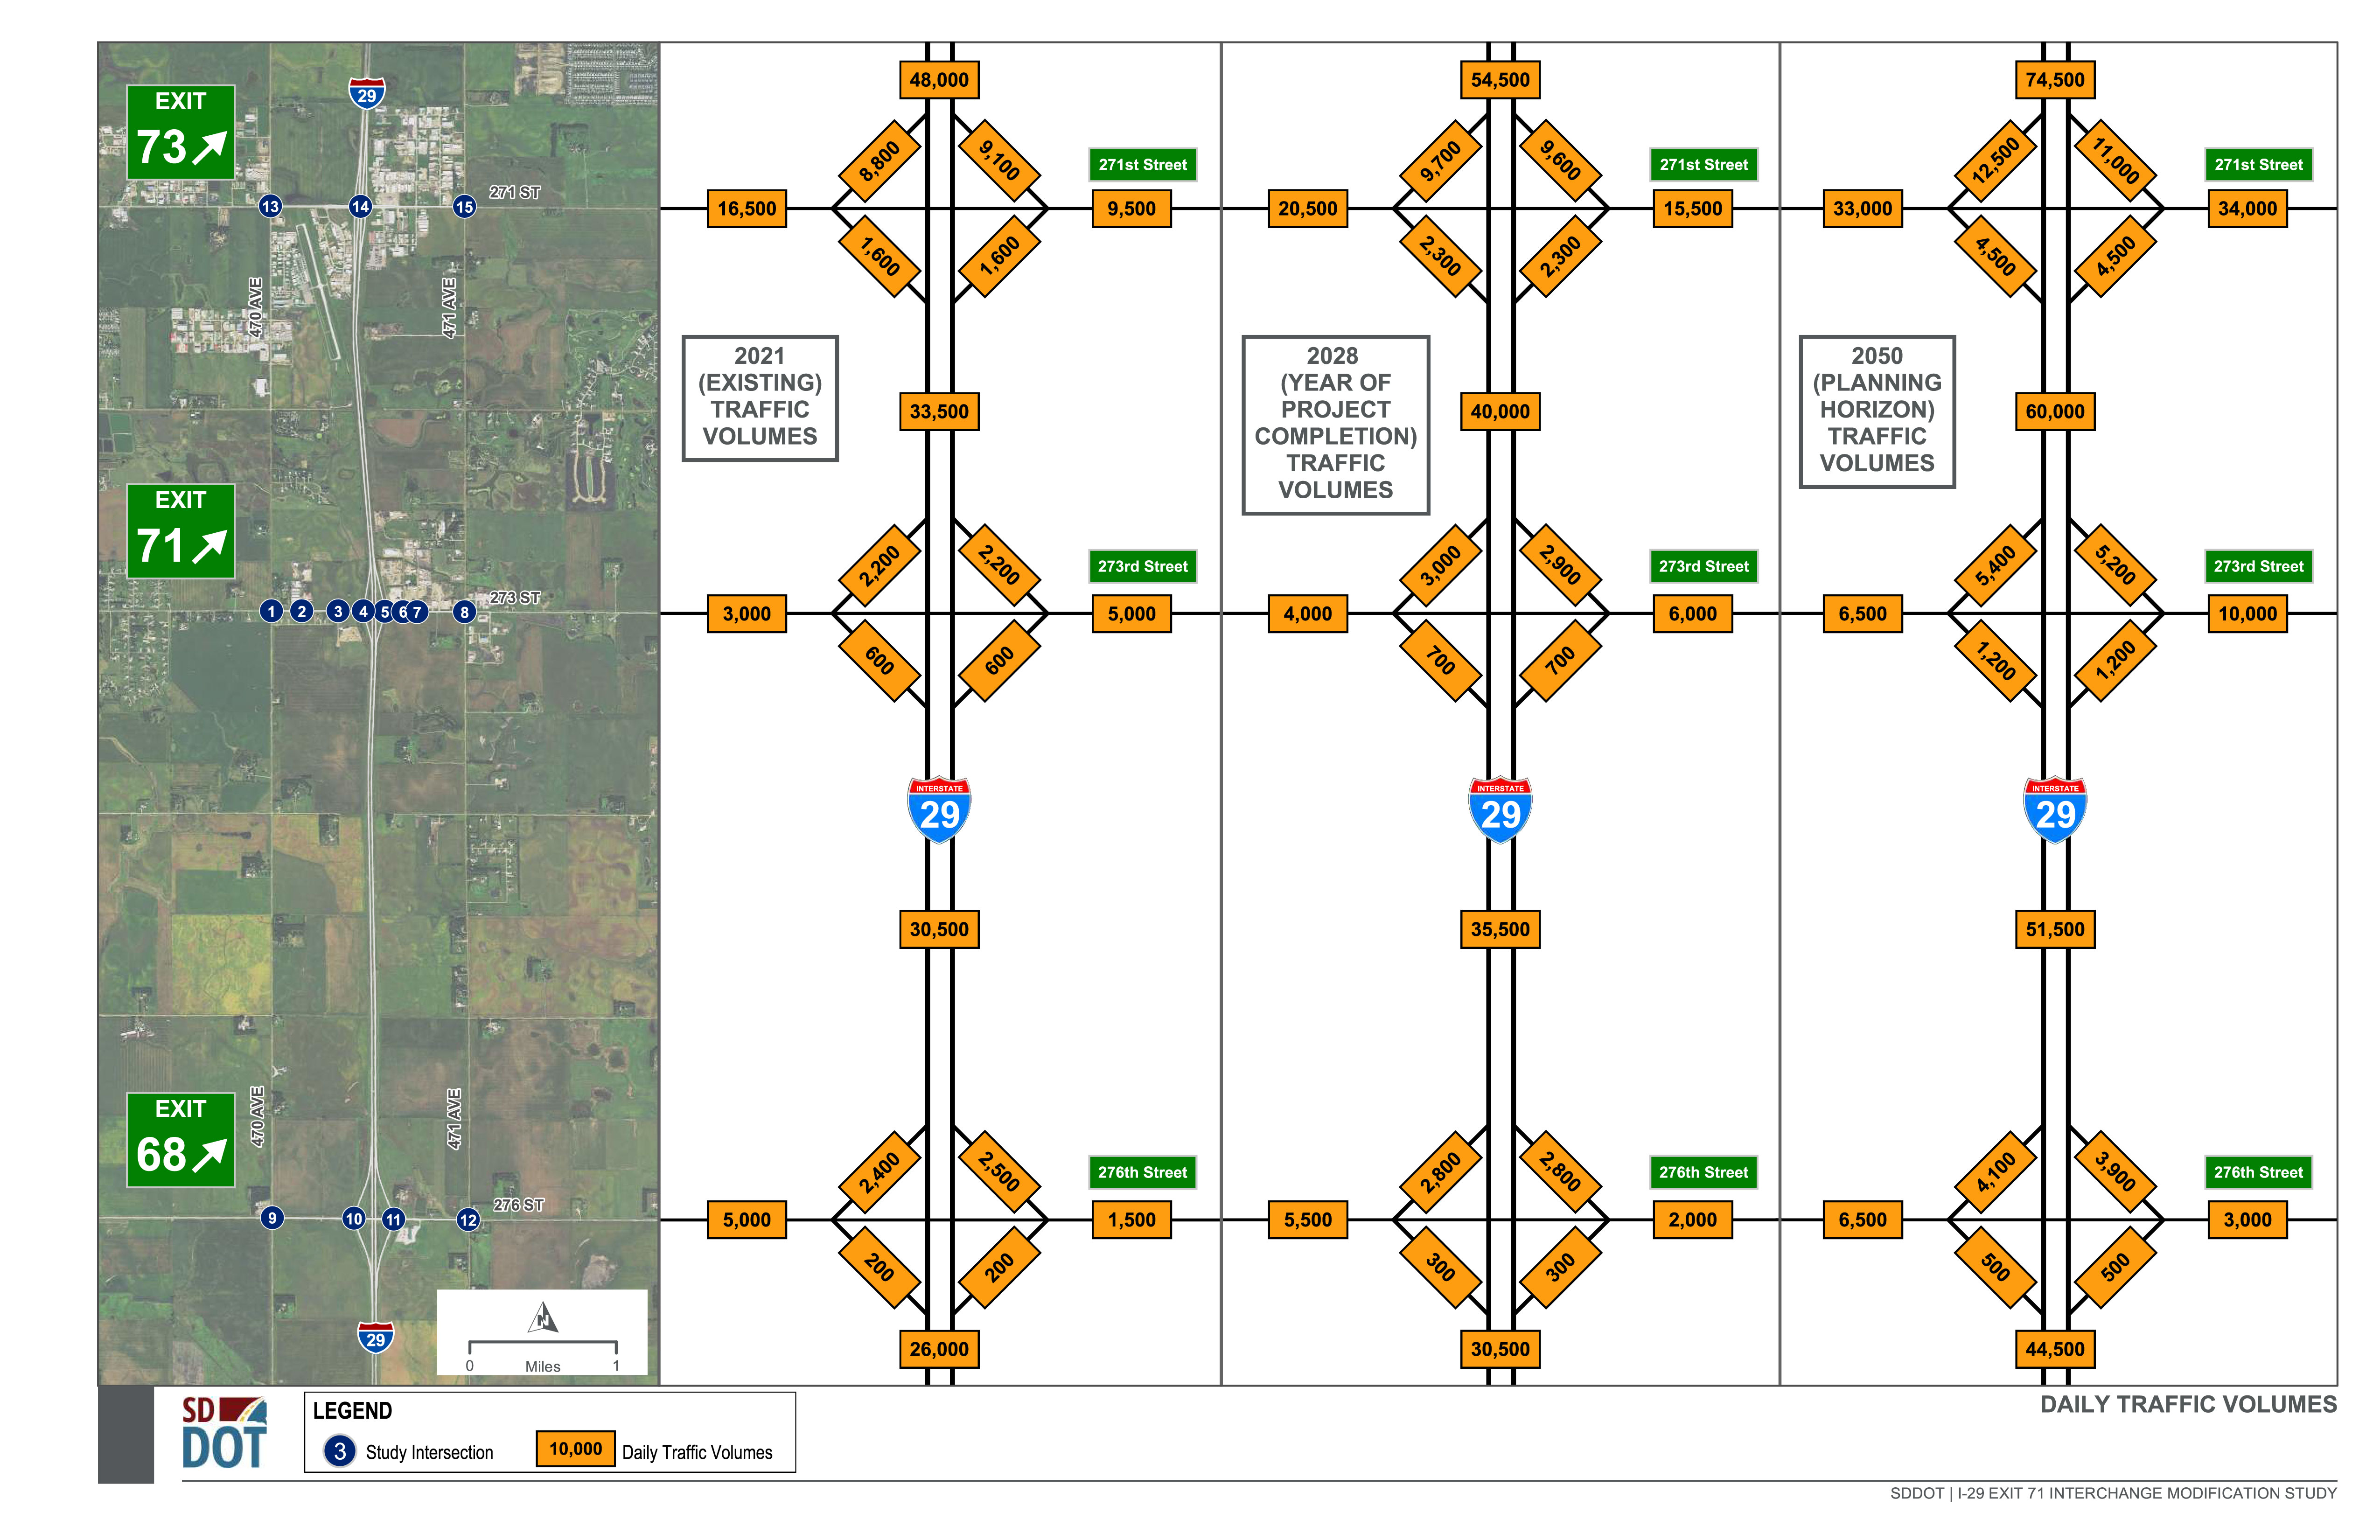 The Traffic Volumes Study graphic shows existing and forecasted traffic volumes along I-29 mainline, within Exit 68, 71, and 73, and along the 271st Street, 27rd Street, and 276th Street corridors.  Forecasted traffic volumes reflect estimated traffic growth to Years 2028 and 2050. 